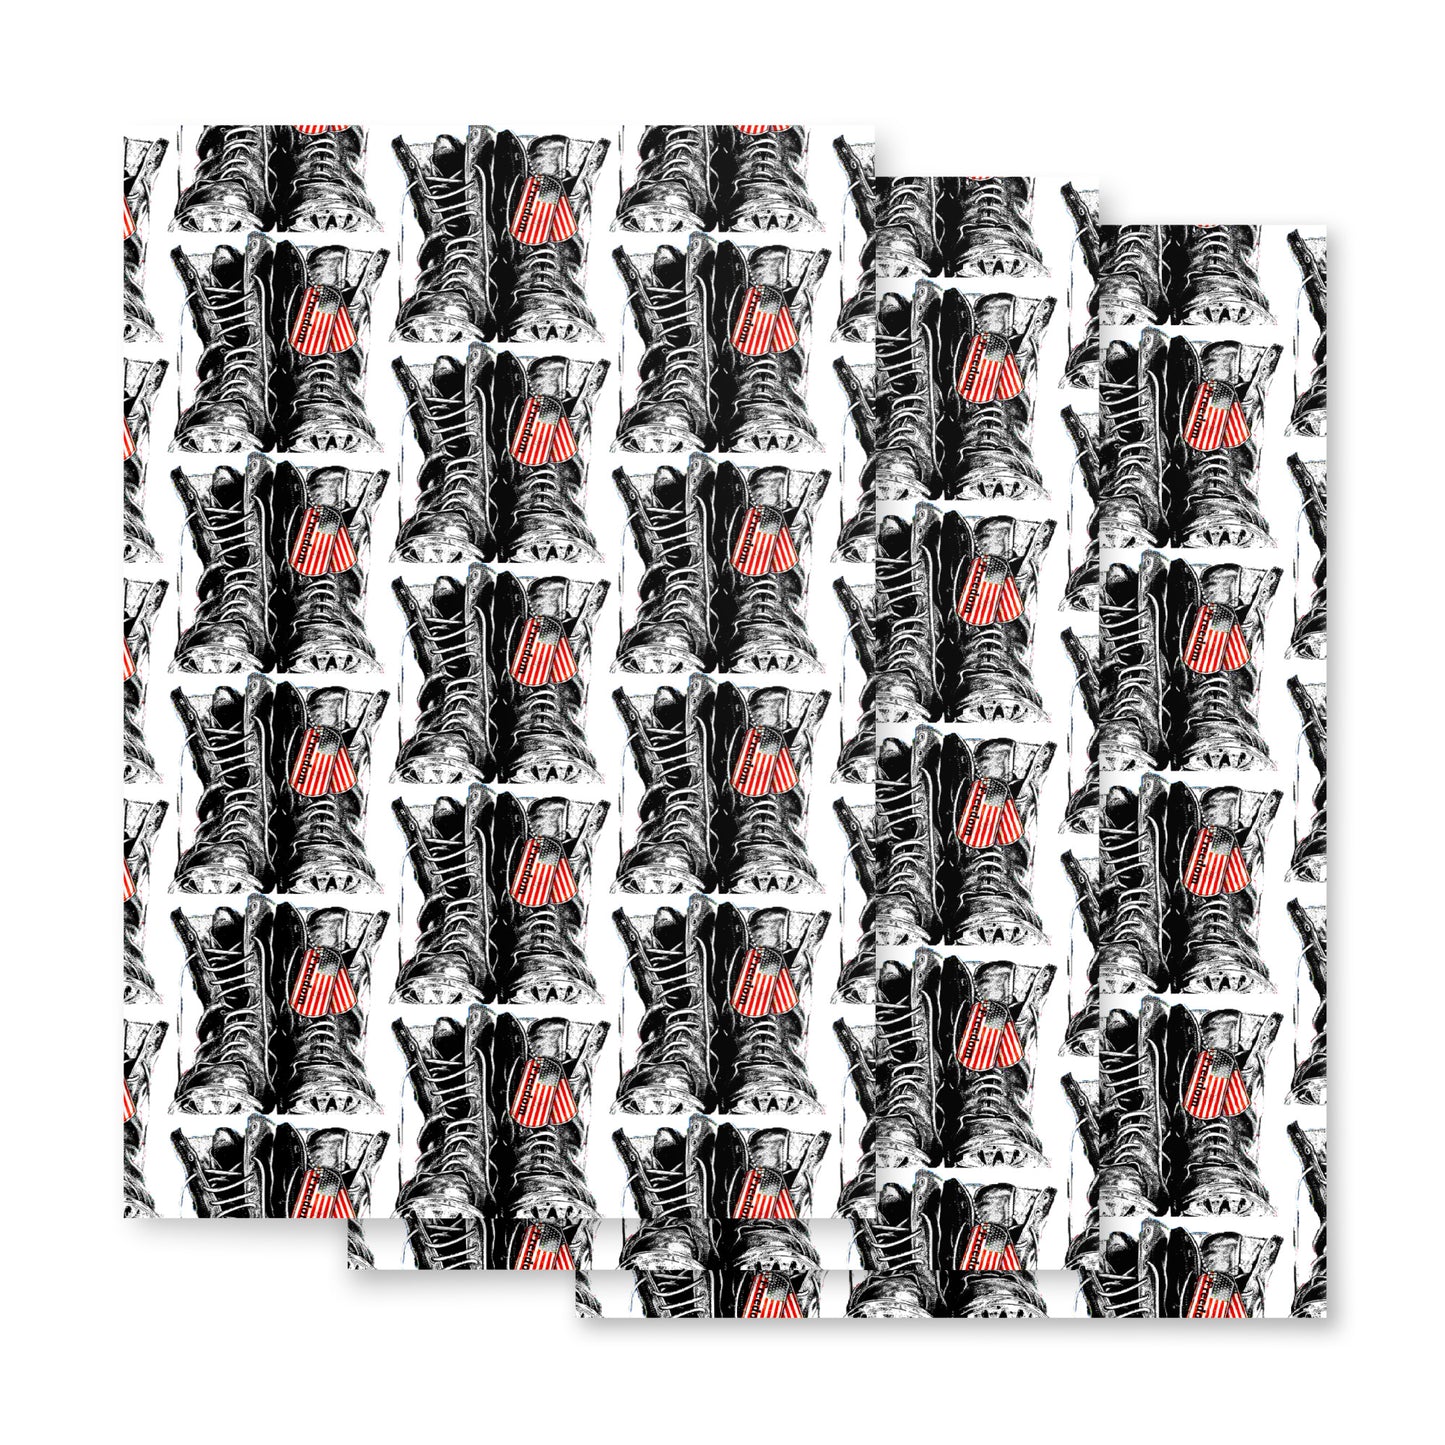 Freedom Wrapping paper sheets